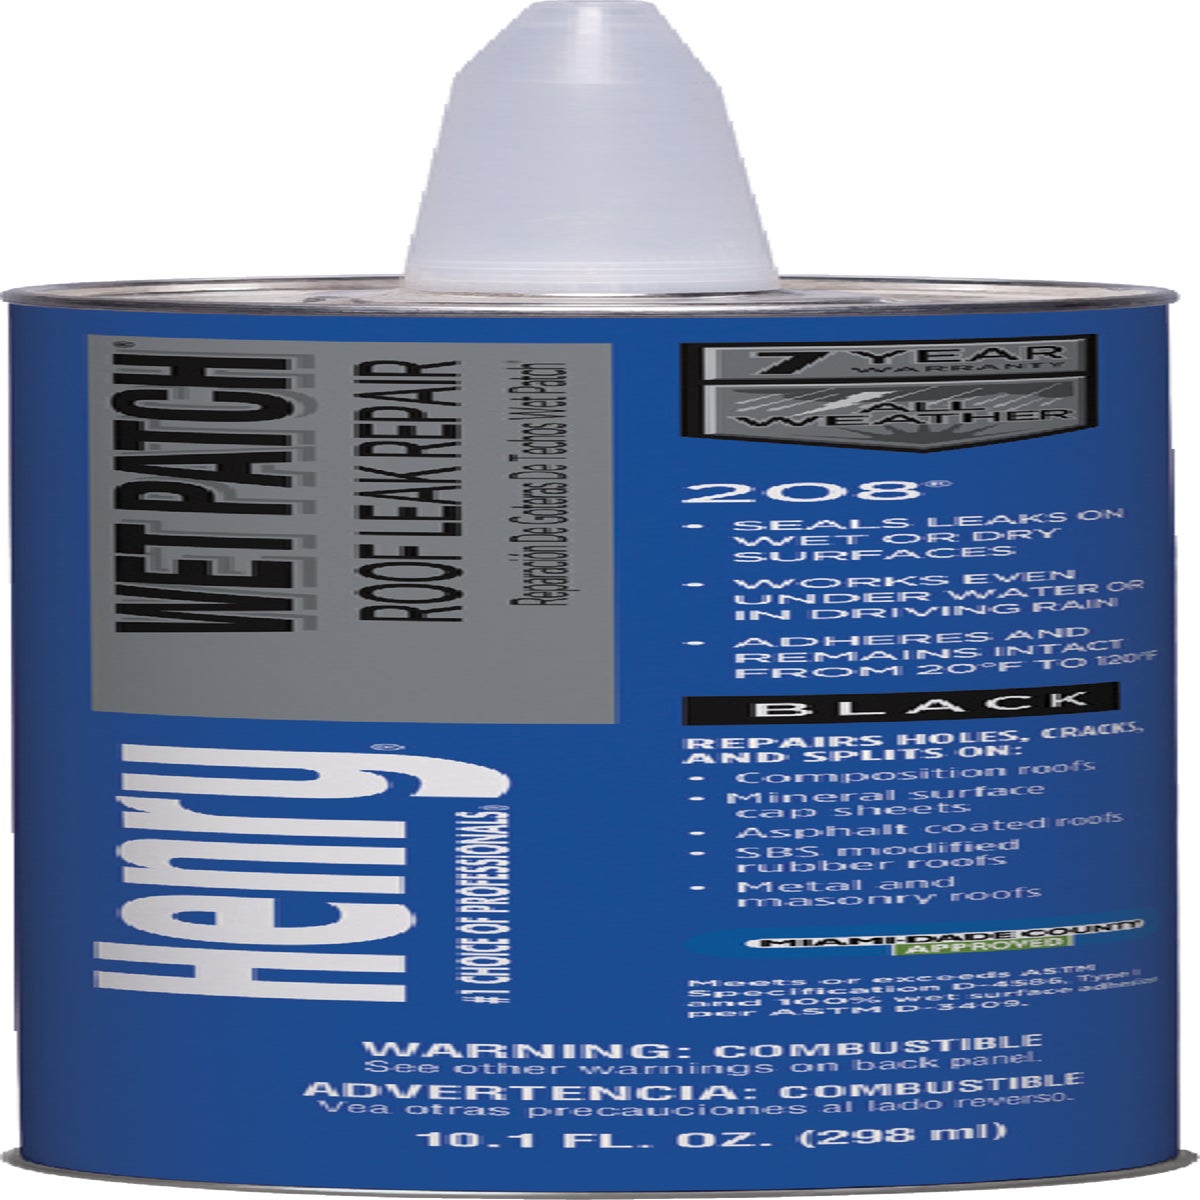 HE208004 Henry Wet Patch Roof Cement and Patching Sealant & cement patching roof sealant